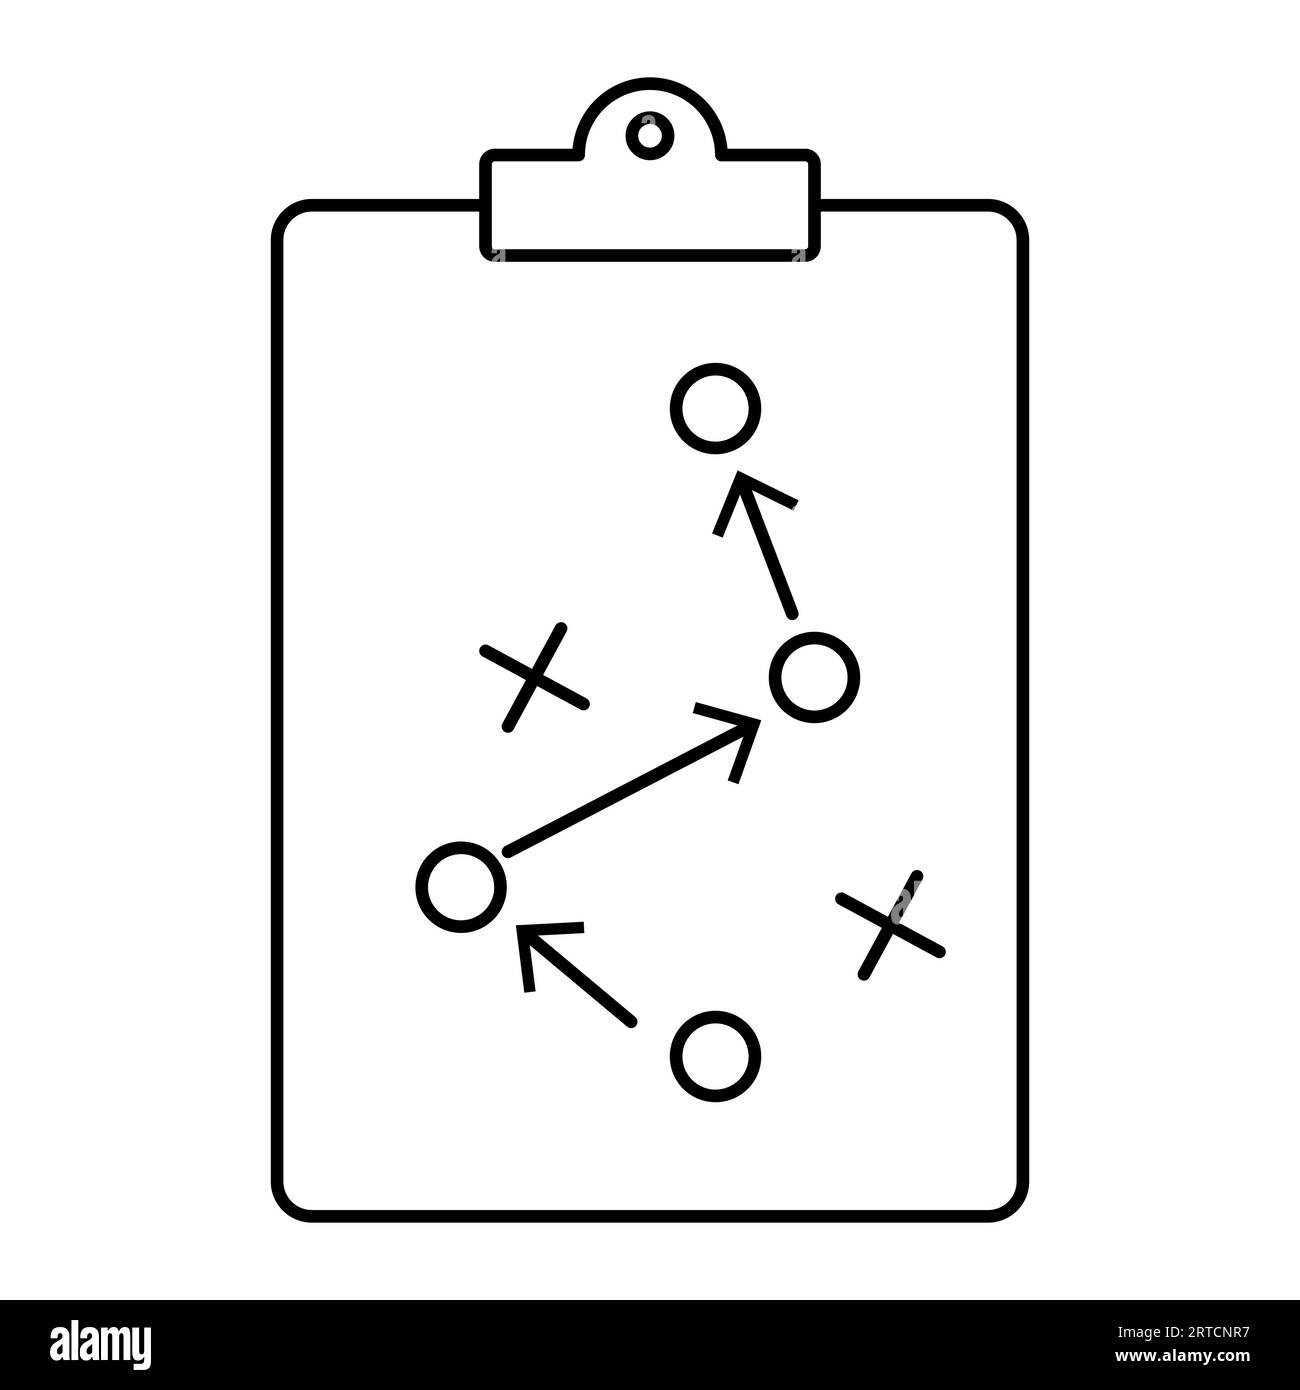 Football tactics on clipboard. Football coach strategy board. Vector illustration isolated on white background Stock Vector